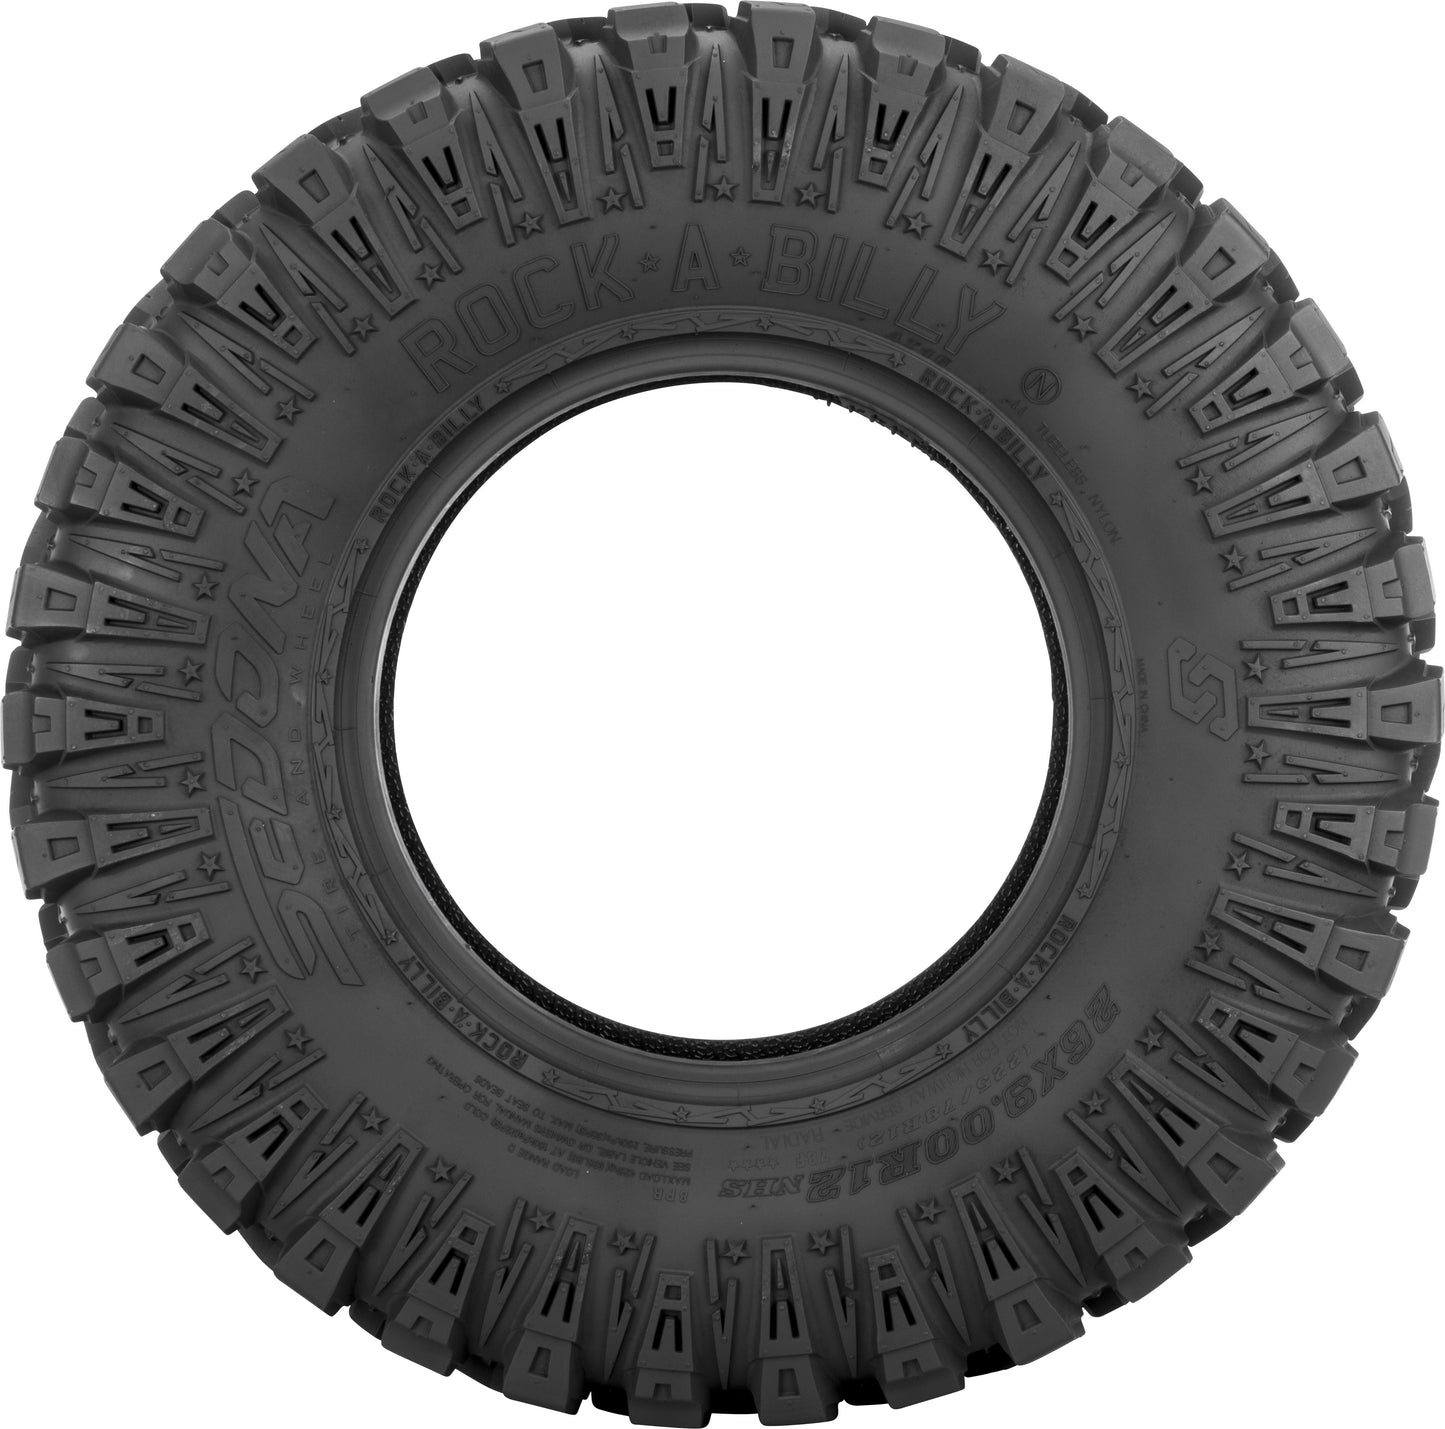 Rock-A-Billy Tire PR-8 PSI-8 Radial Construction